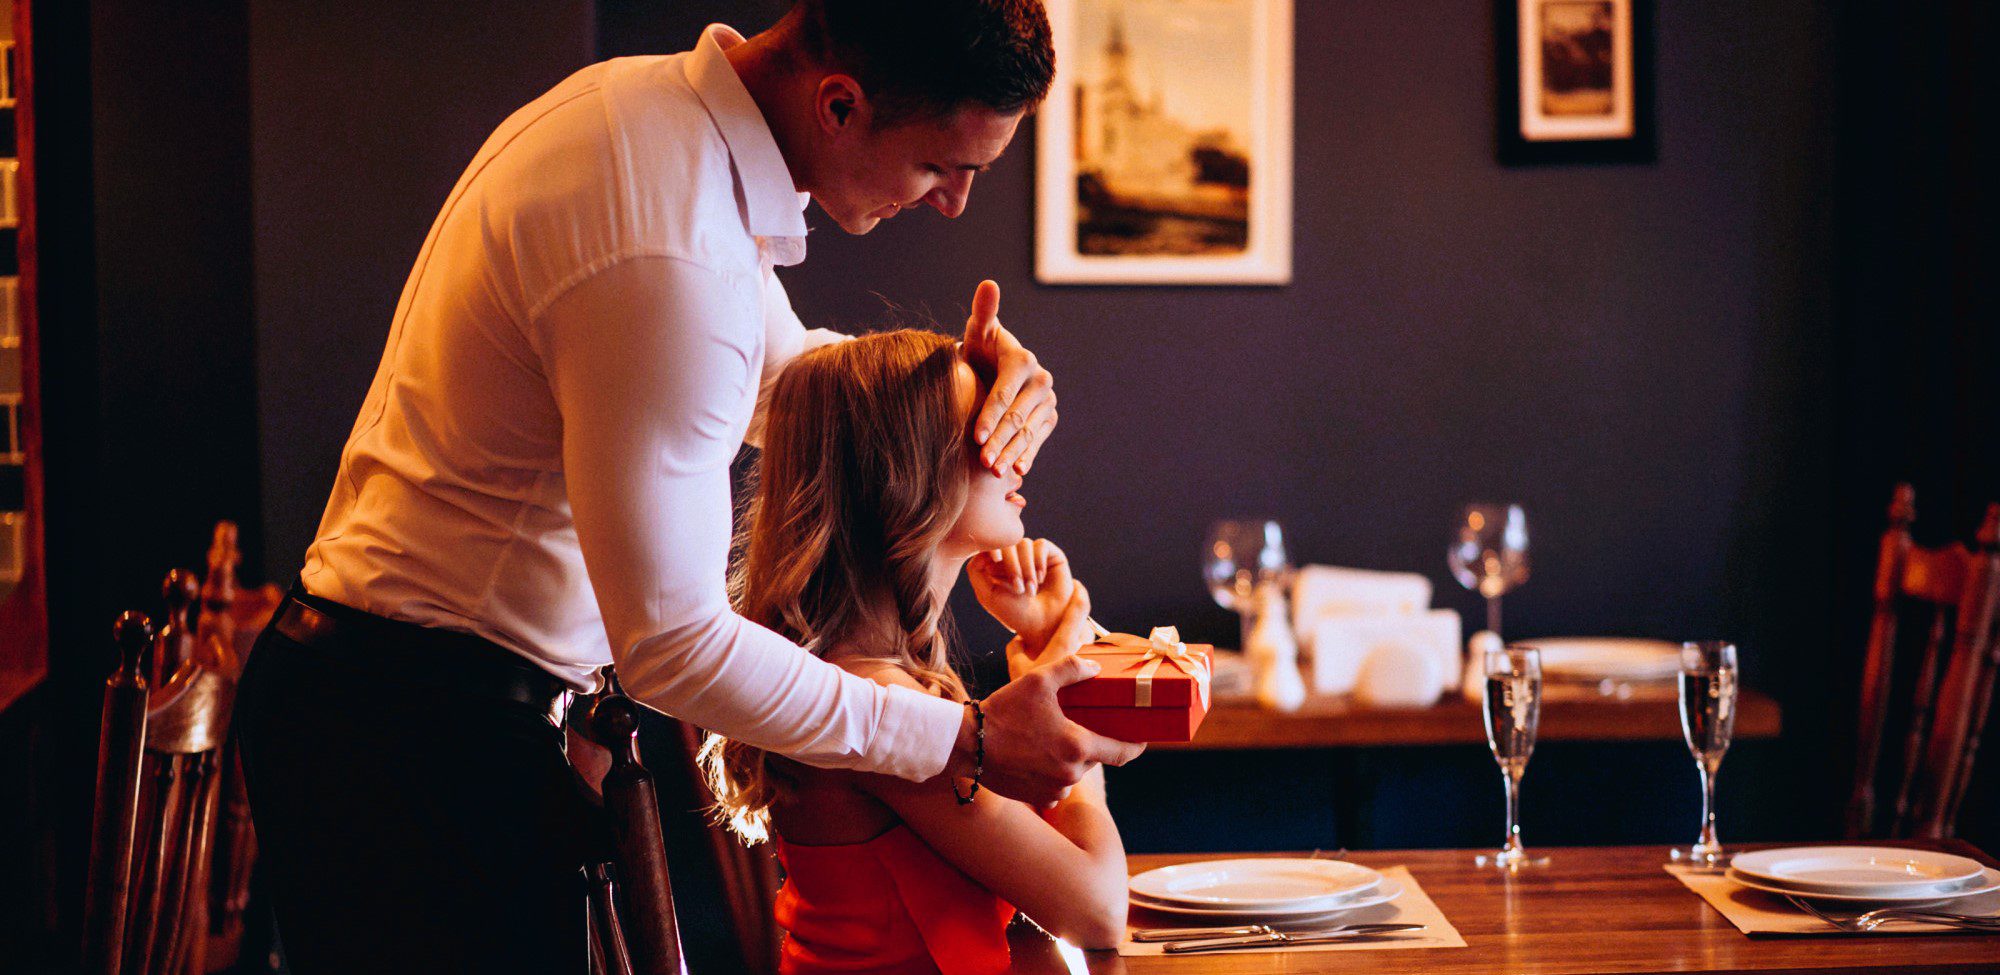 elegant couple in restaurant, her sitting at the table, him standing behind her, holding her eyes closed and offering her a present as surprise